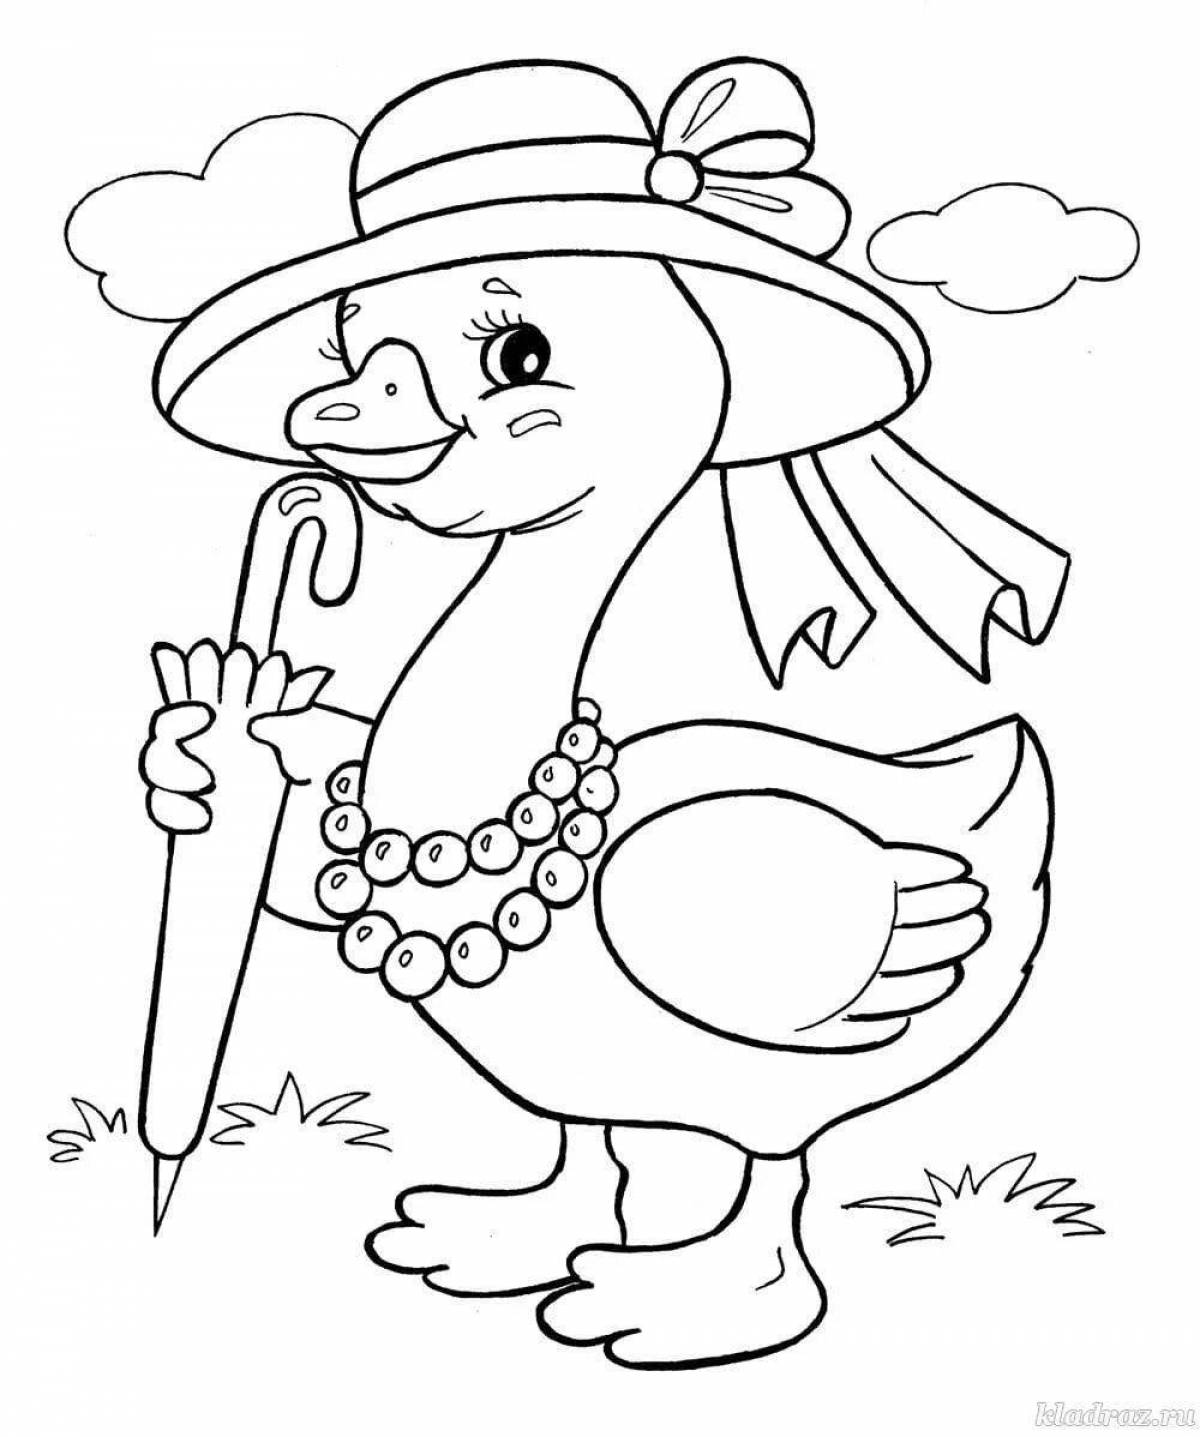 Delightful coloring book for girls 4-5 years old